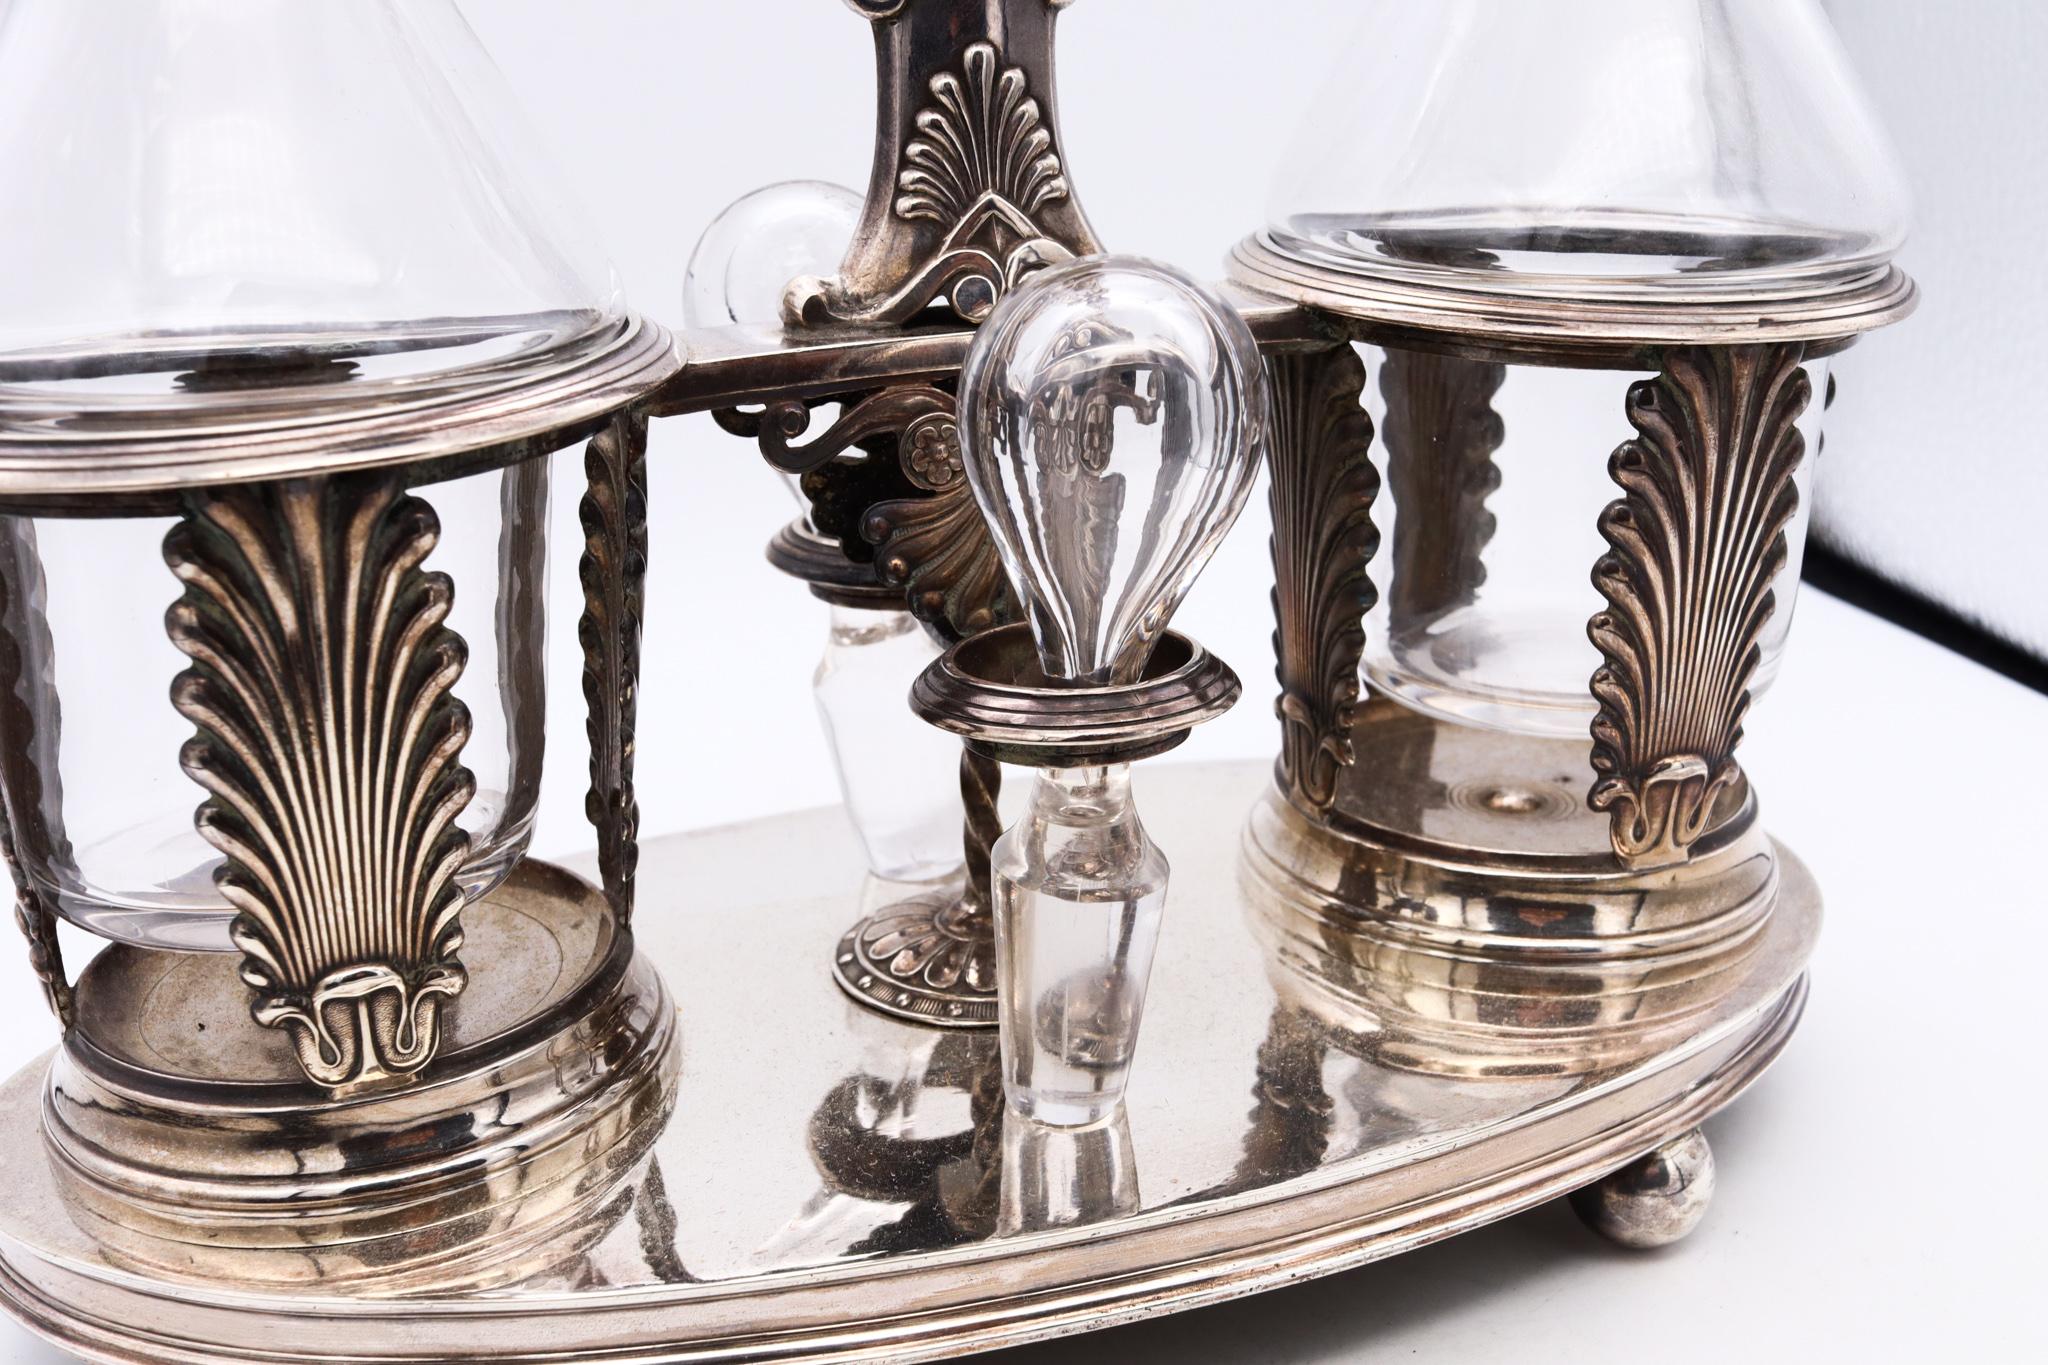 Silver France Lyon 1838 By Armand Caillat Neoclassical Hoilier Cruet Set .950 Sterling For Sale